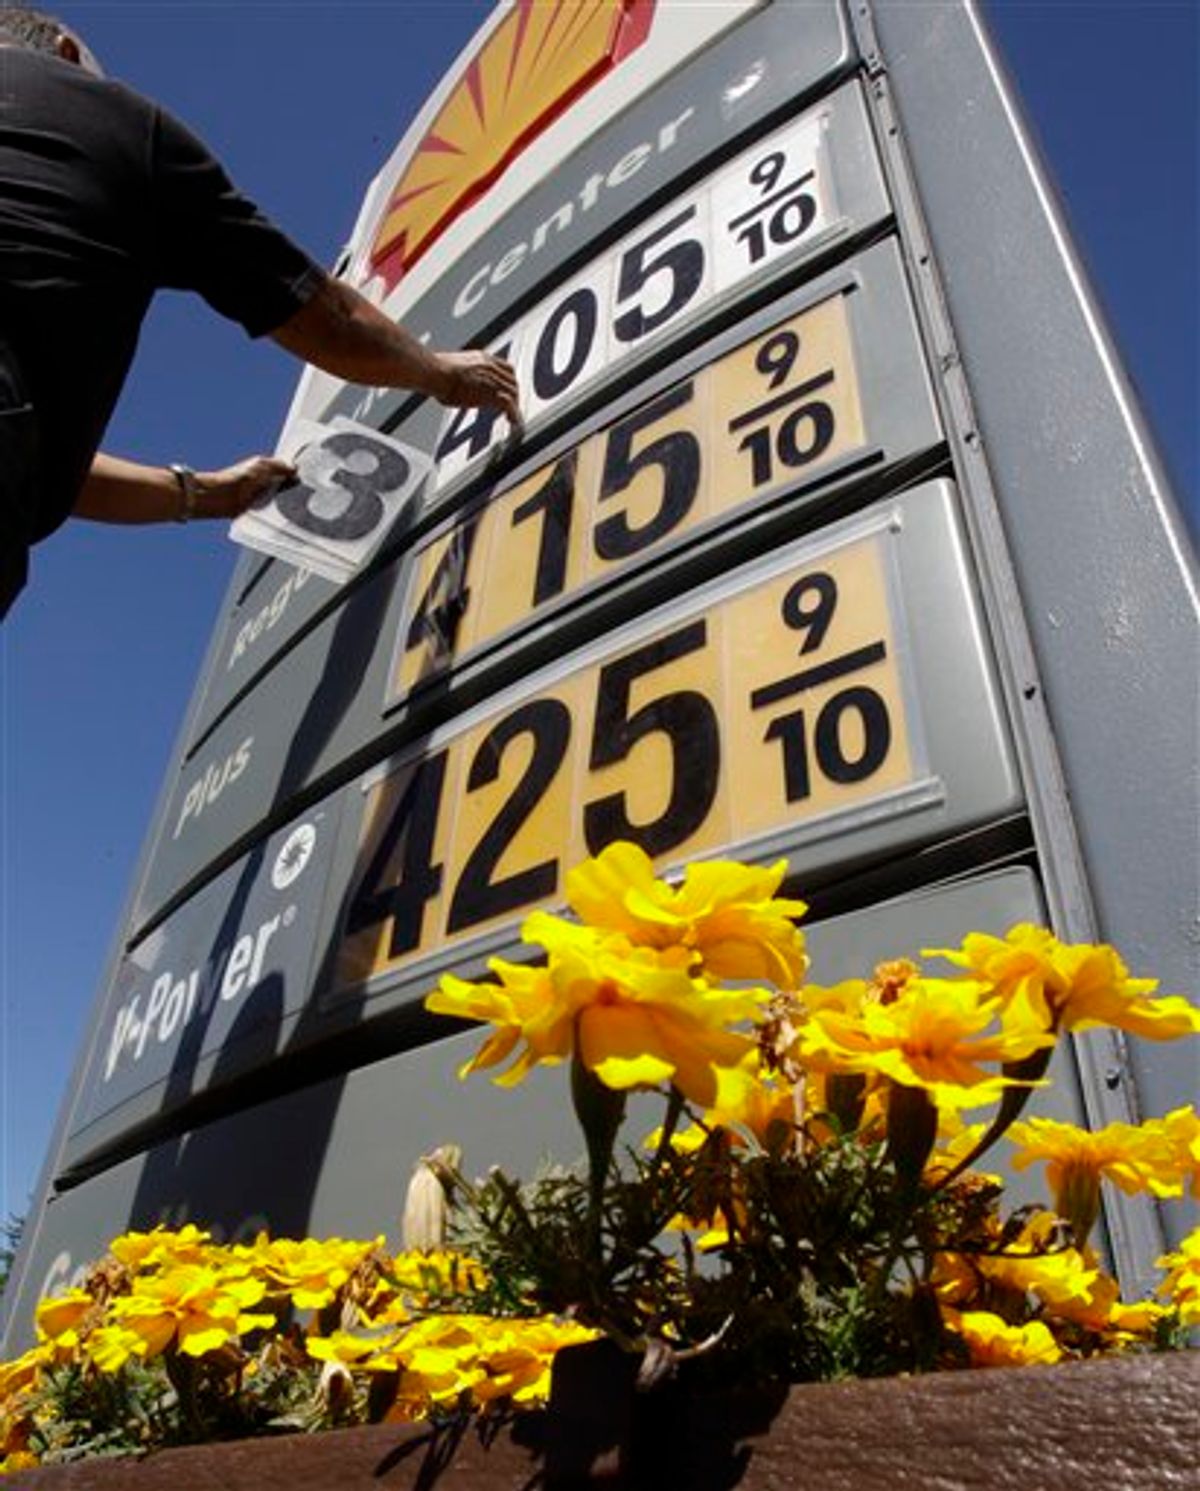 In this June 21, 2011, photo, Shell gas worker Toke Fusi lowers gas prices at a Shell gas station in Menlo Park, Calif. (AP Photo/Paul Sakuma)